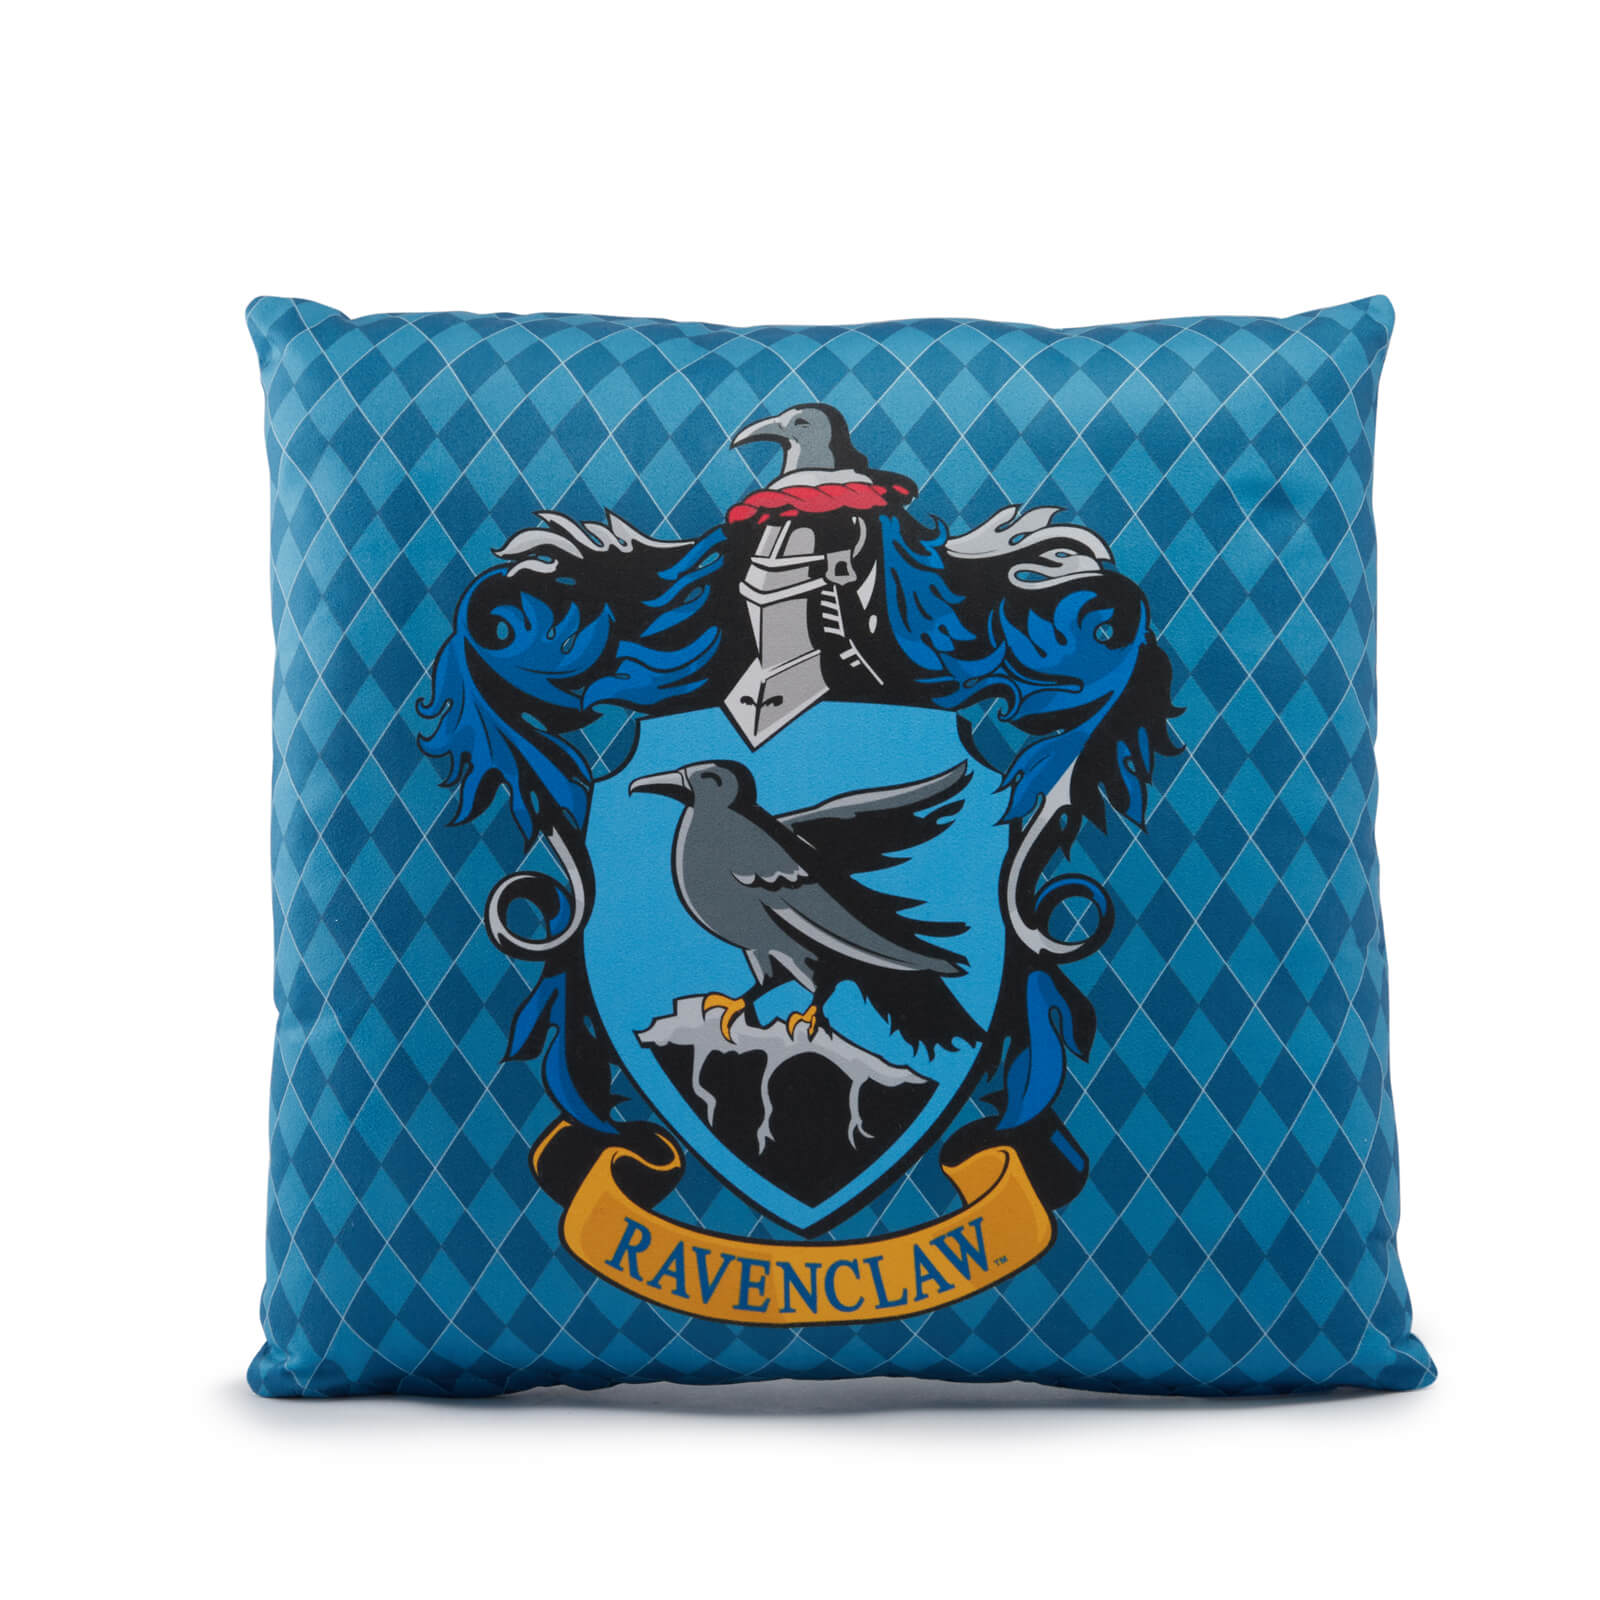 Harry Potter Ravenclaw Square Cushion - 40x40cm - Soft Touch